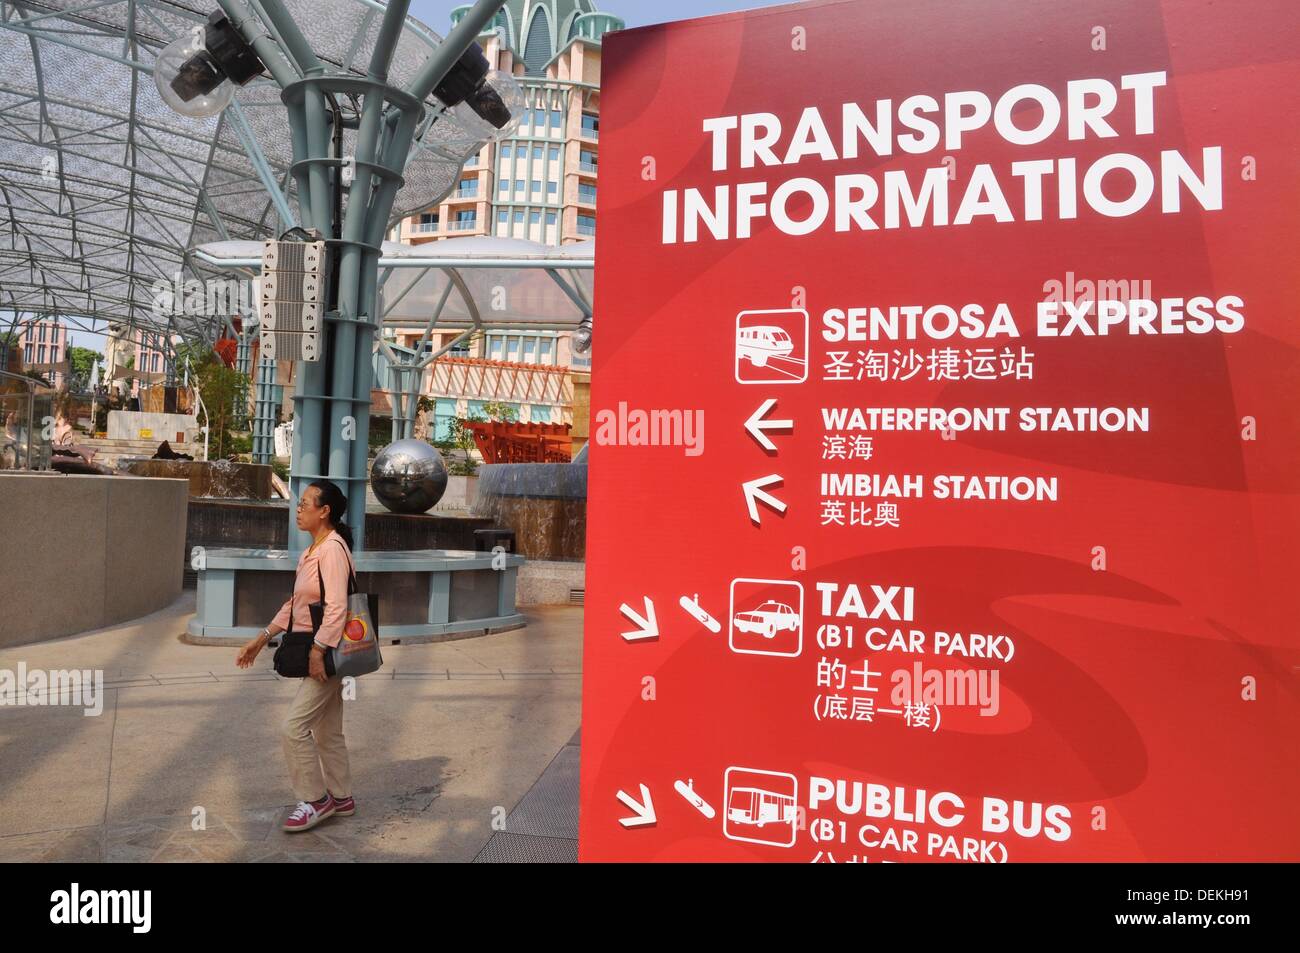 Singapore: a transport information sign by the Universal Studios in Sentosa island Stock Photo